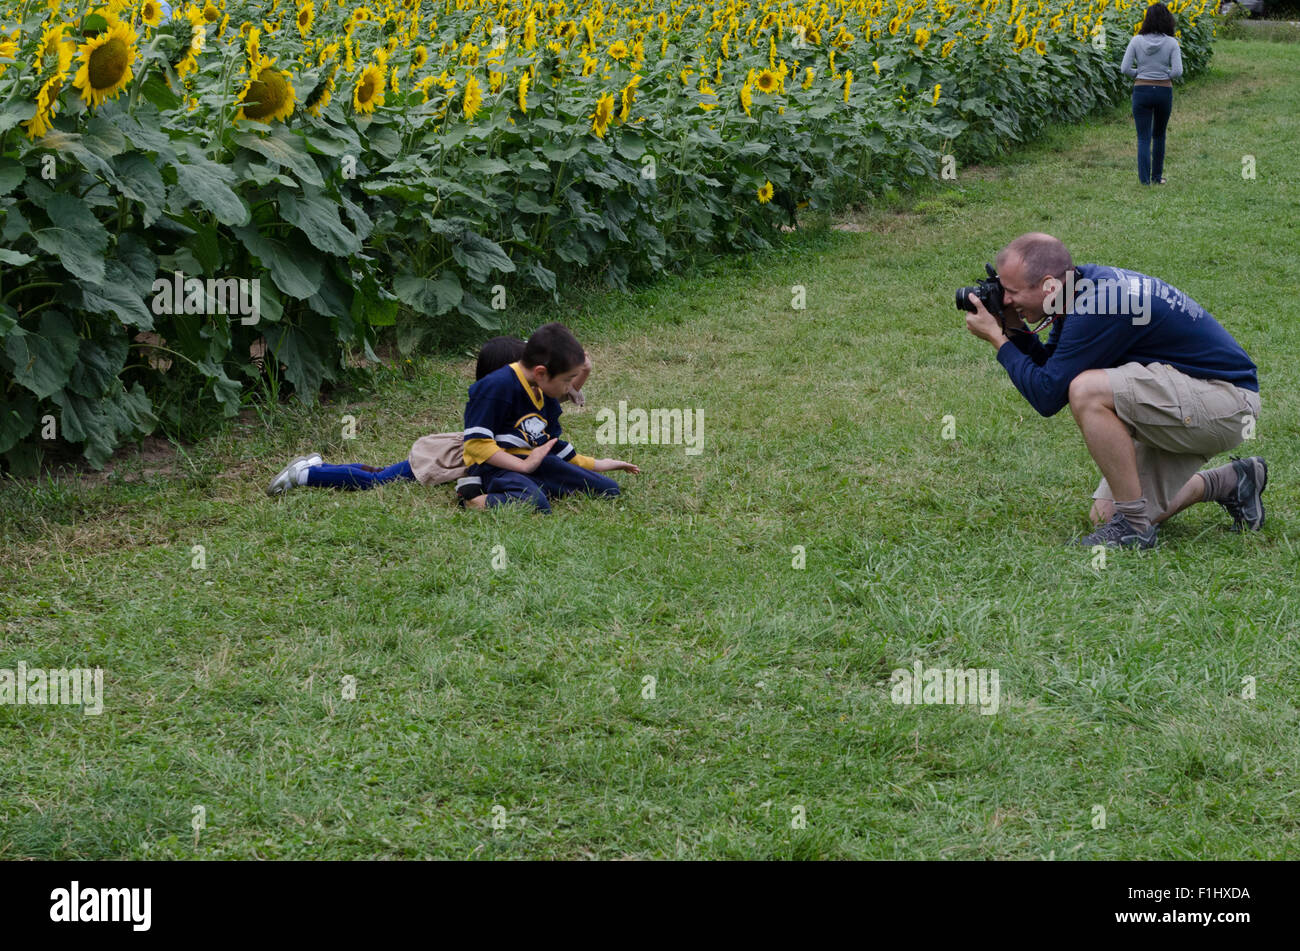 Man taking picture of Sunflower field with SLR camera. Stock Photo